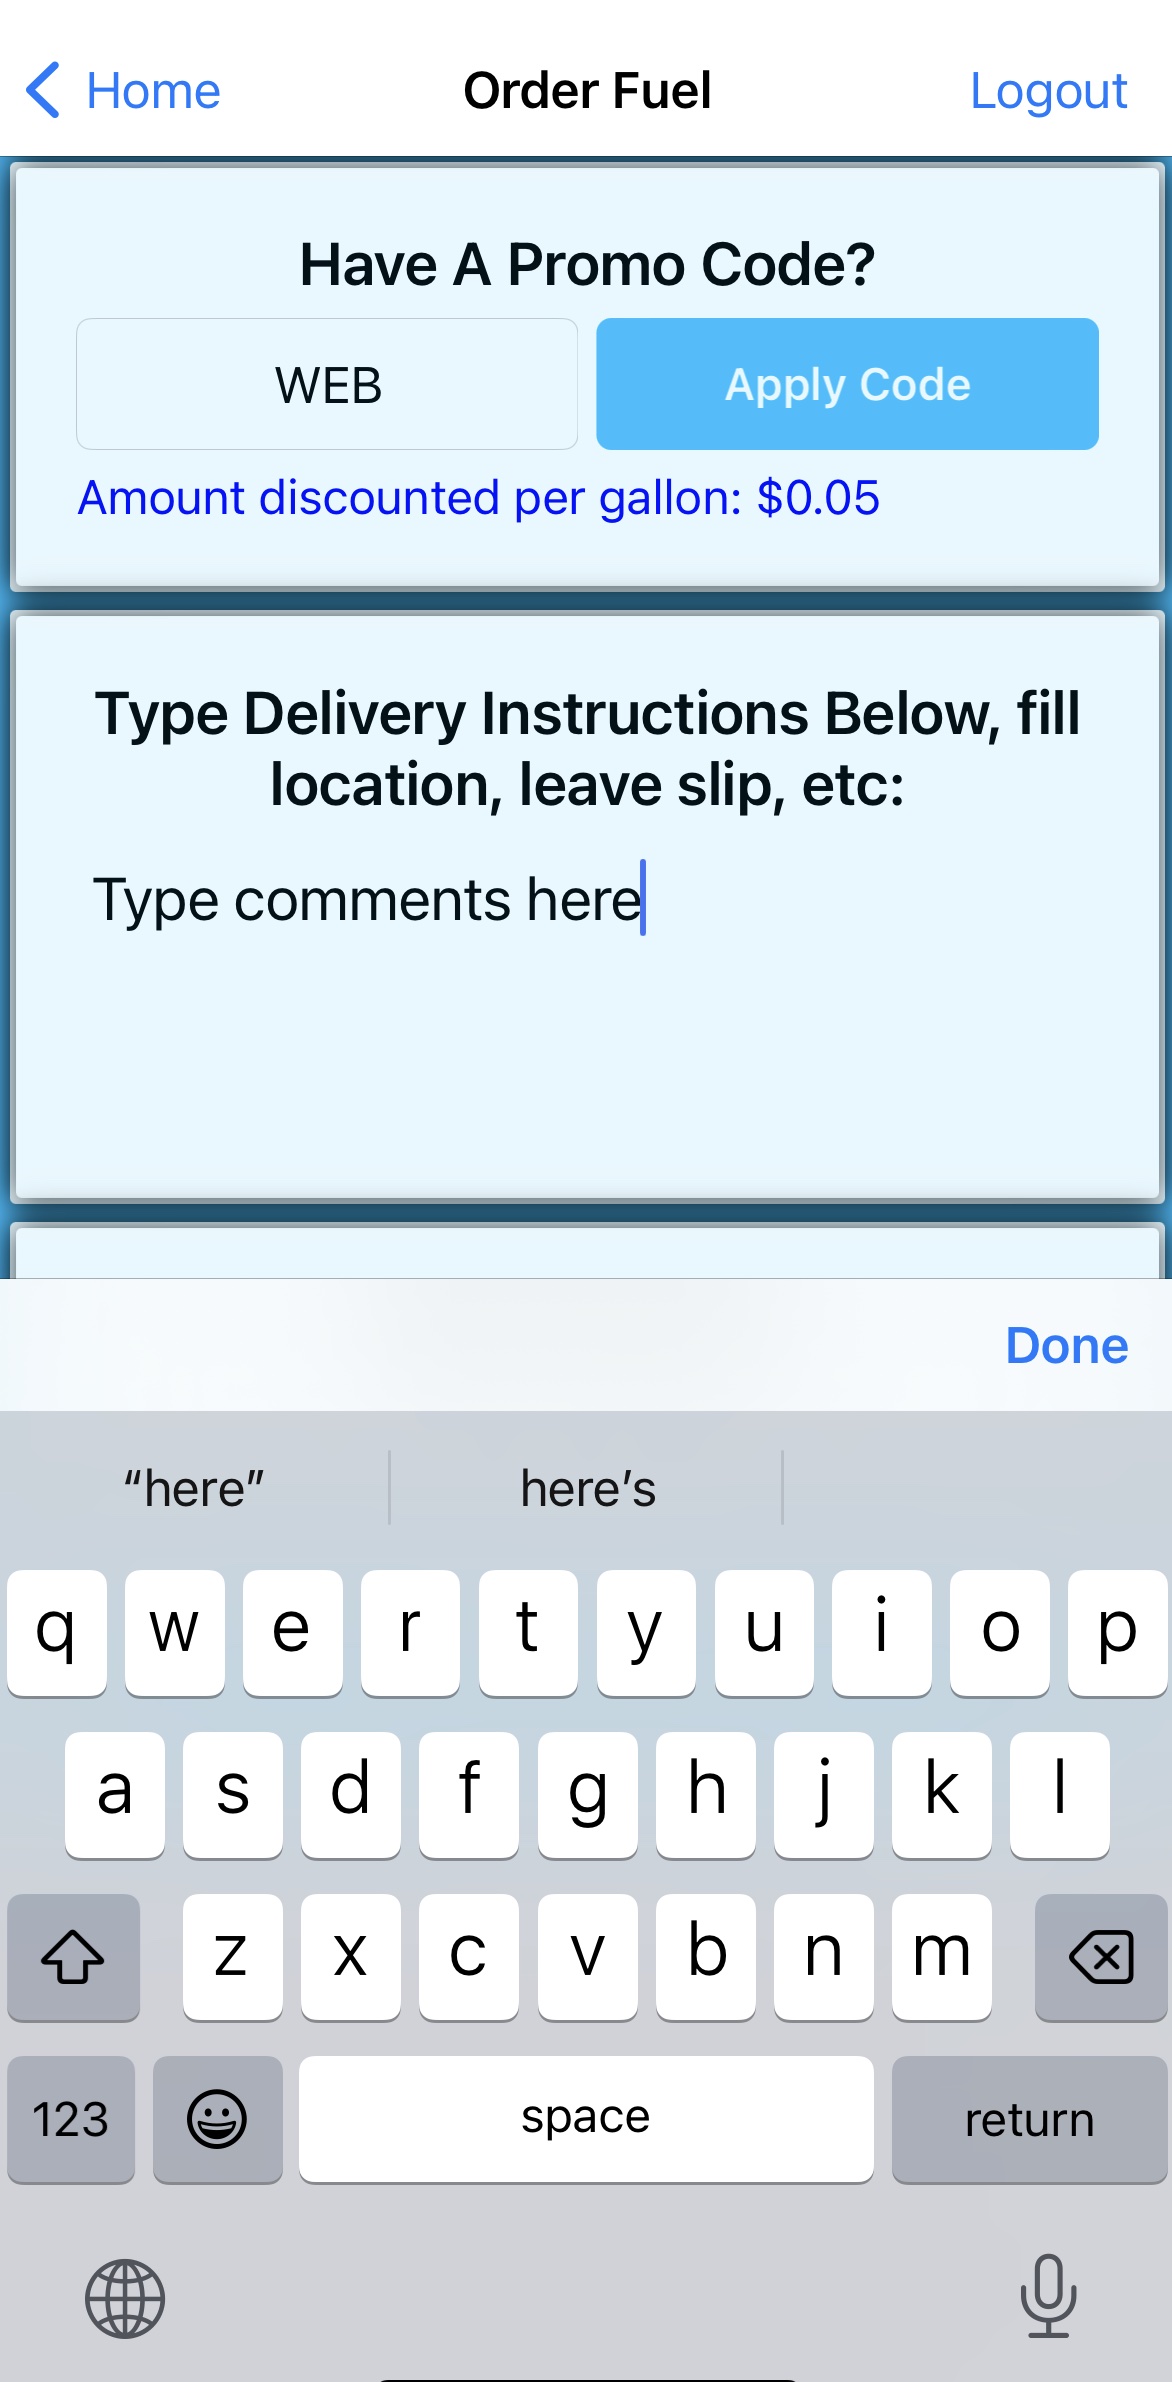 6 Delivery Instructions